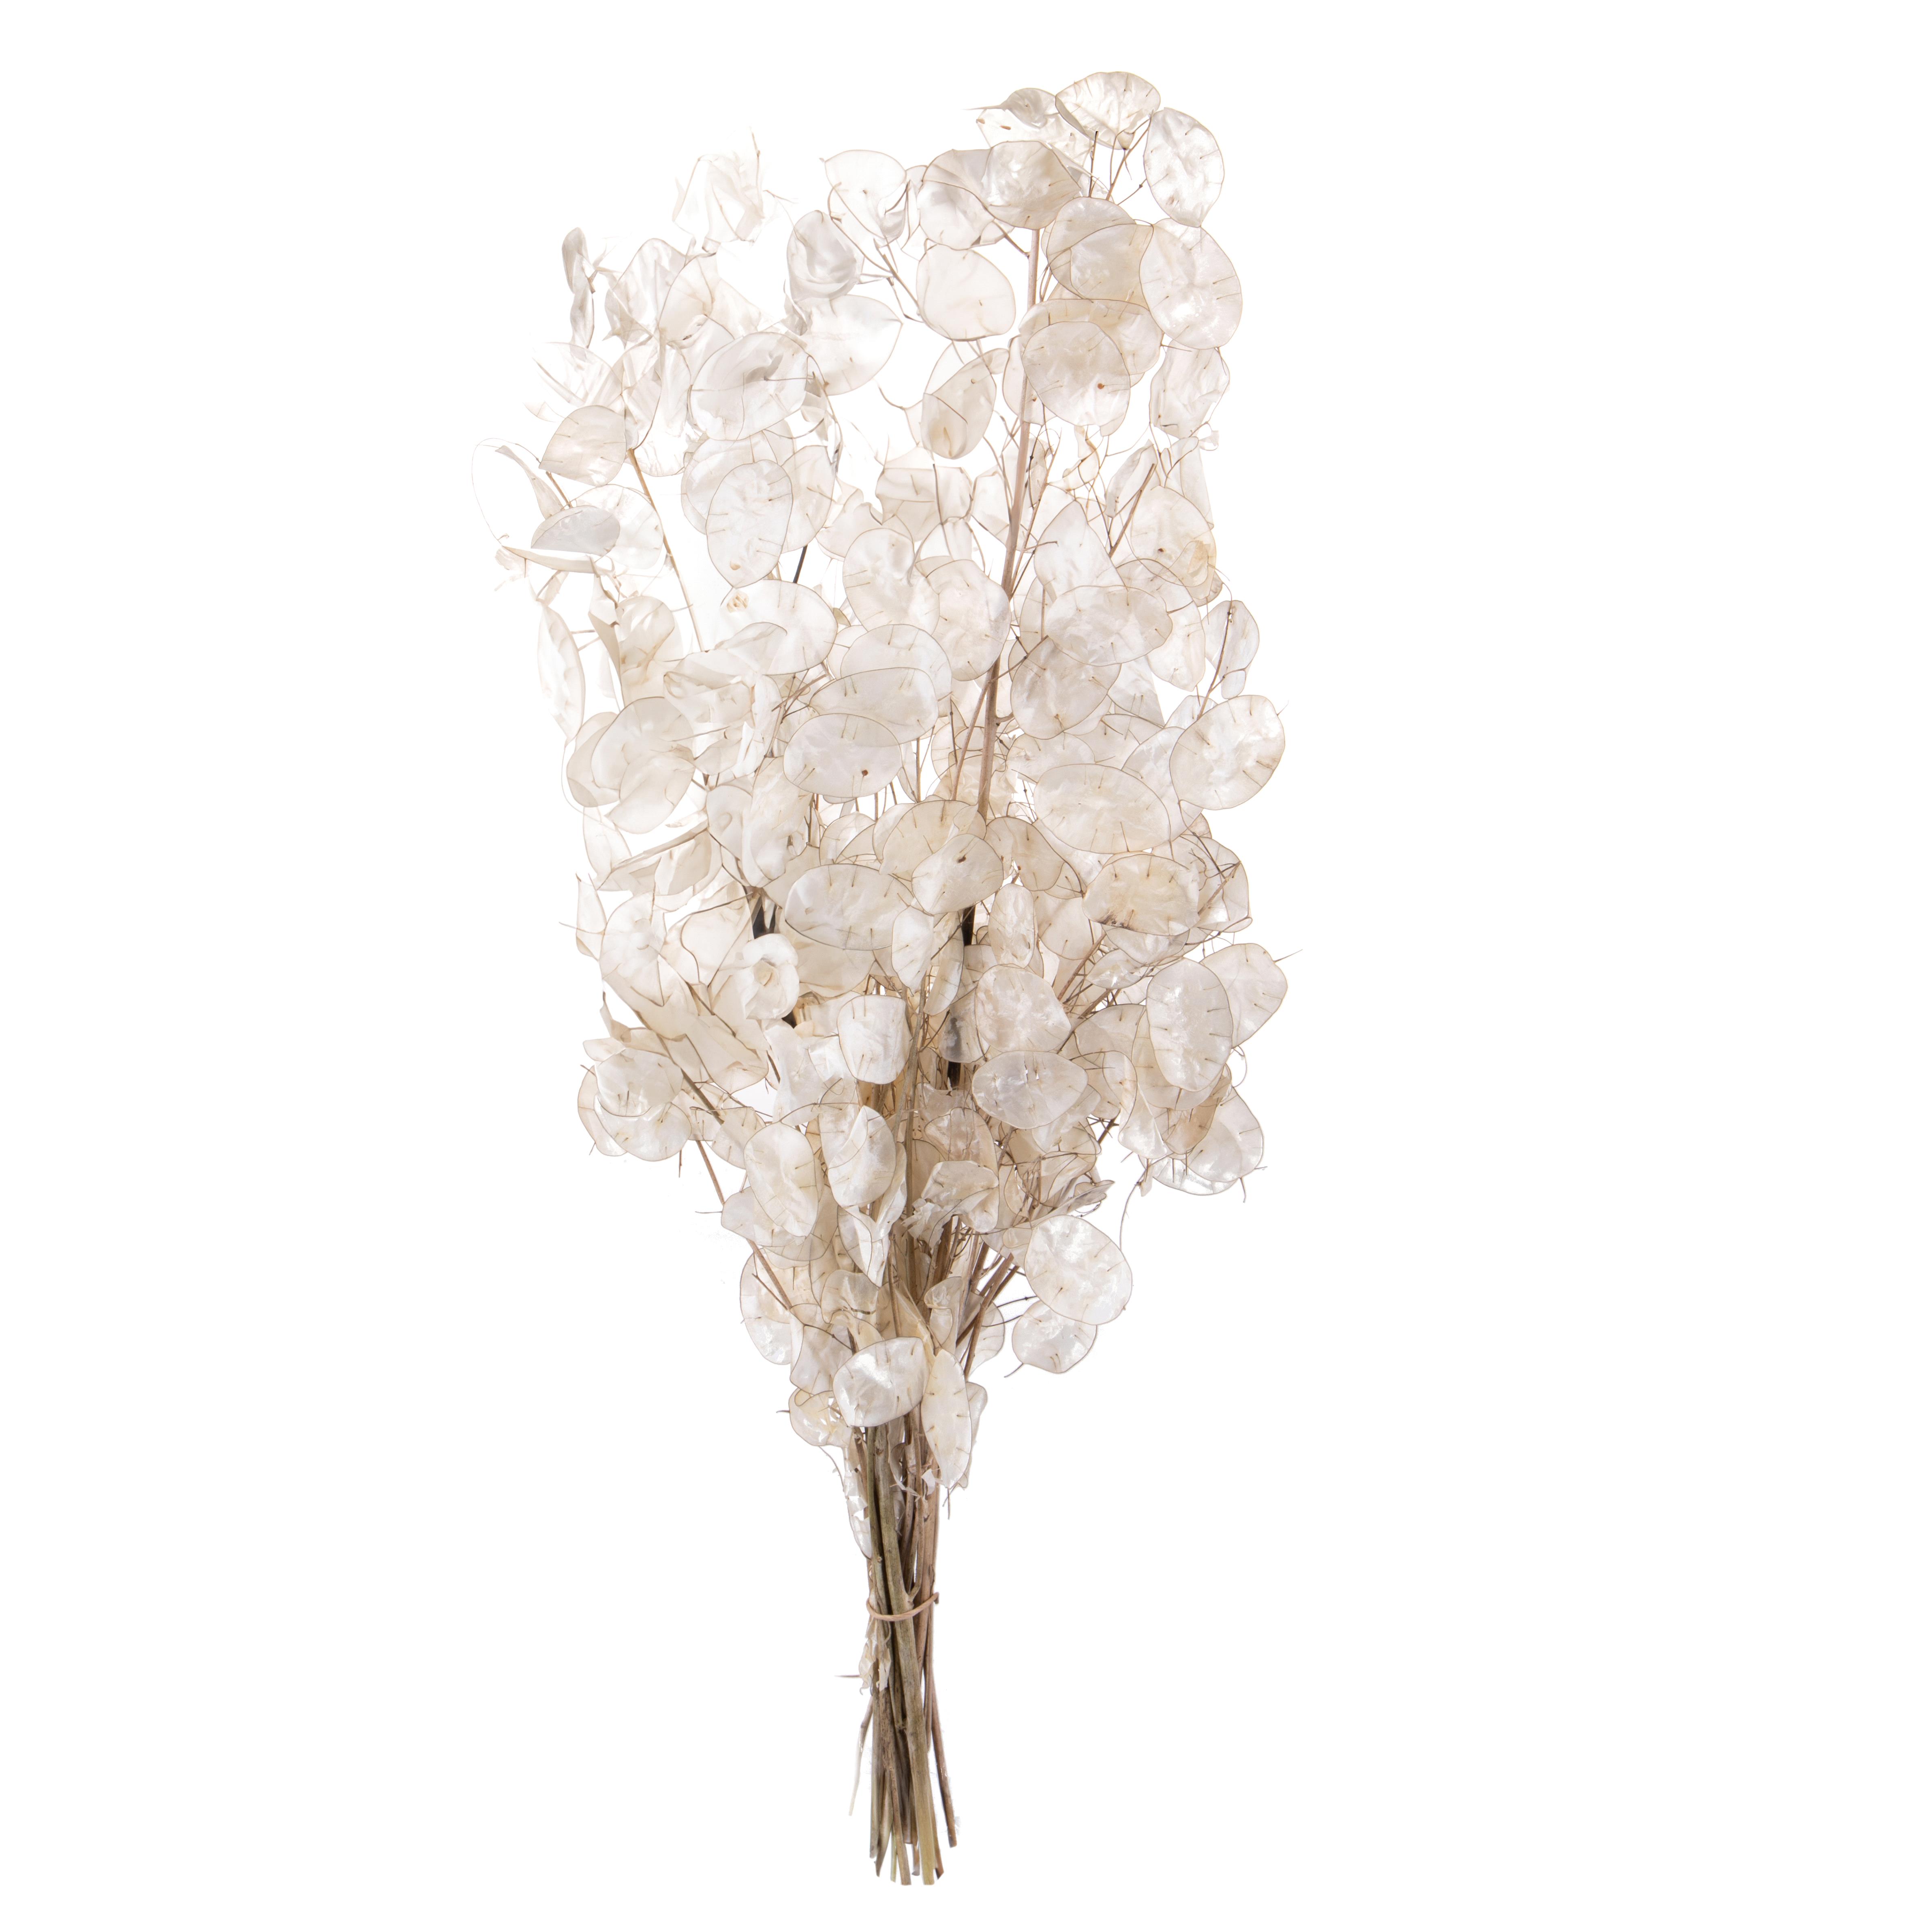 NATURAL PRODUCTS DRIED FLOWERS AND ERBS, FLOWERS, FRUITS AND NATURAL PROTEES, LUNARIA REDIVIVA MAZZO 90 CM